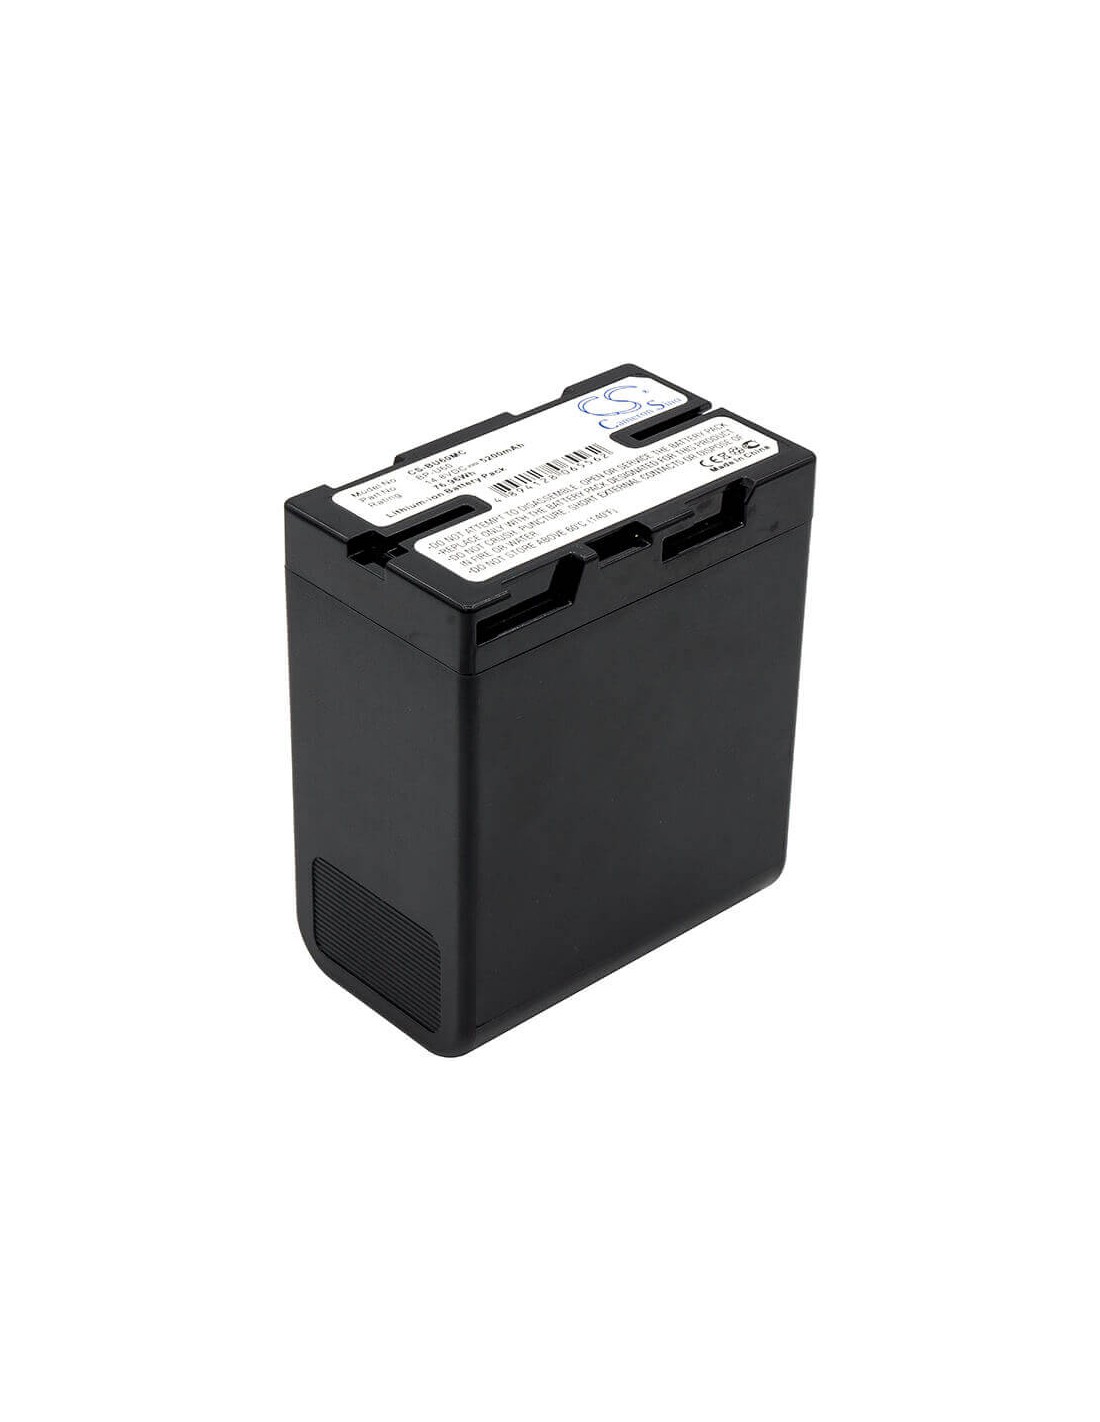 Battery for Sony Pmw-100, Pmw-150, Pmw-160, Pmw-200, 14.8V, 5200mAh - 76.96Wh